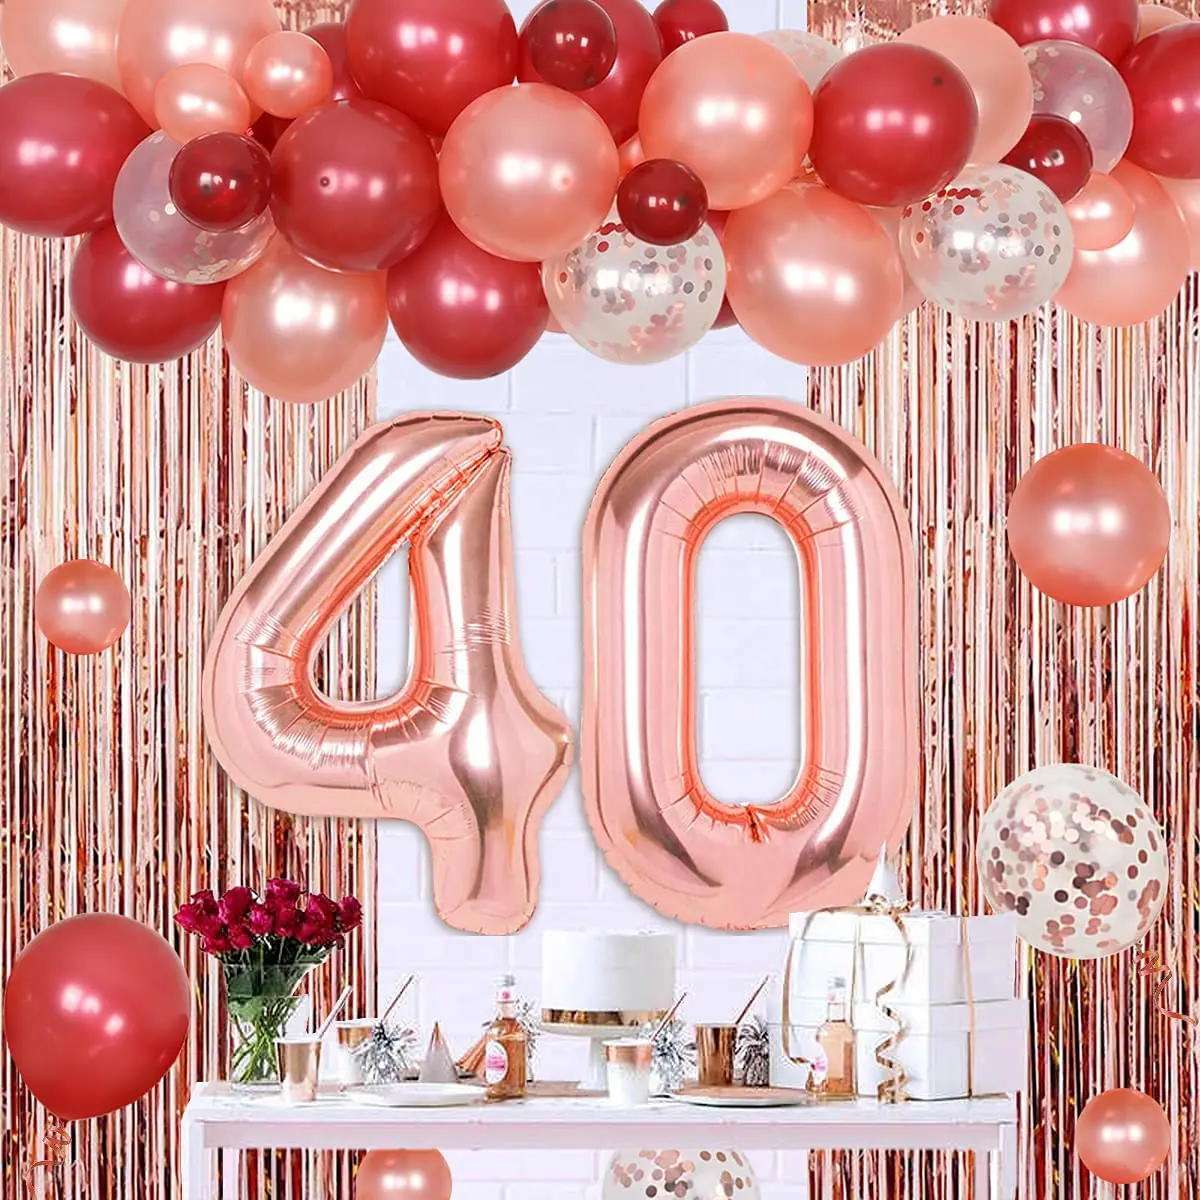 Burgundy 40th Birthday Decorations Rose Gold Balloon Garland Kit with Fringe Curtains Happy 40th Birthday Party Decor for Women - AliExpress